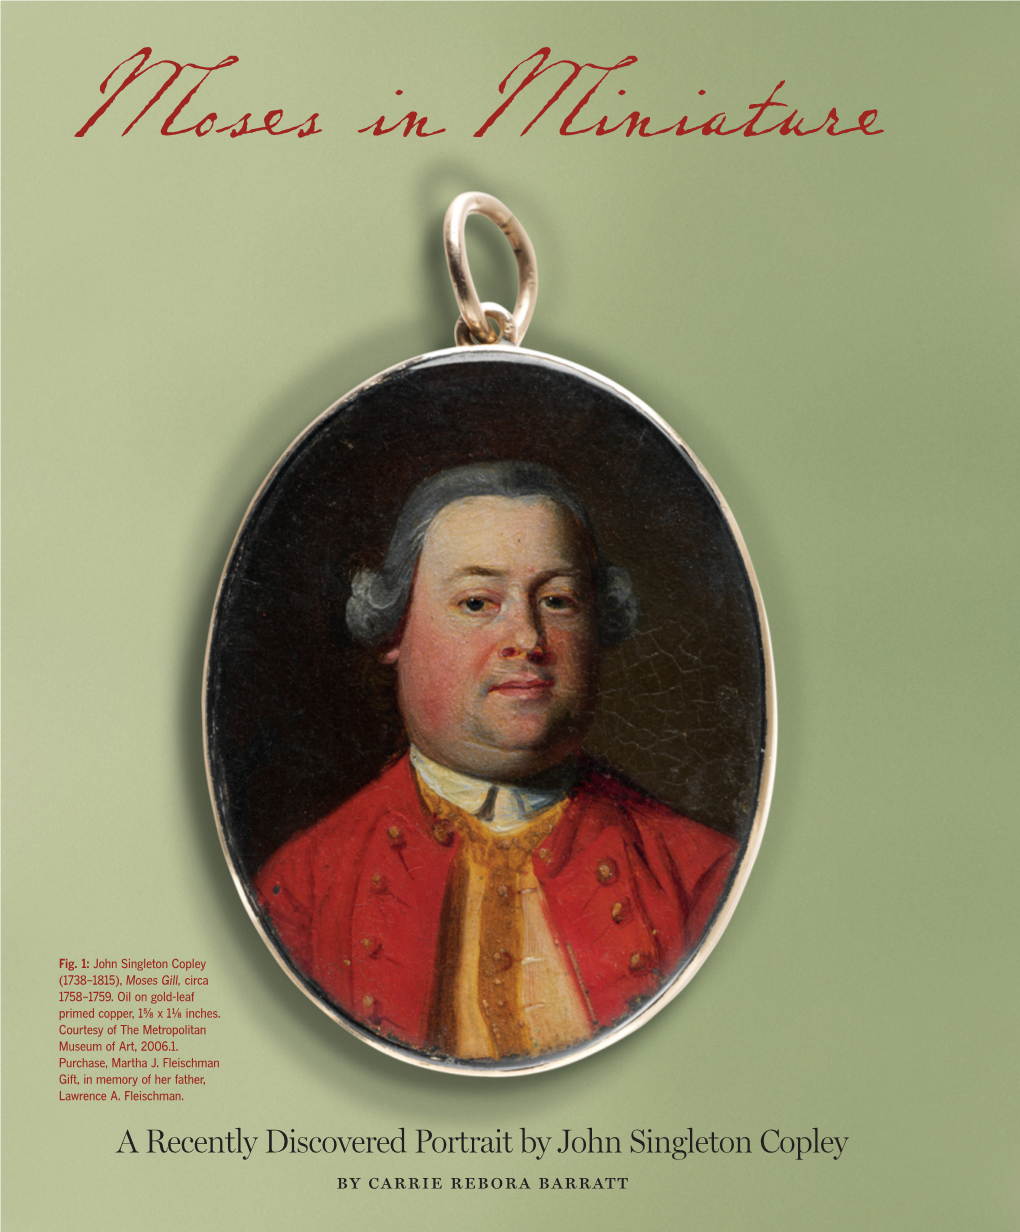 A Recently Discovered Portrait by John Singleton Copley by Carrie Rebora Barratt He Significance of a Newly Found Por- Trait Miniature (Fig